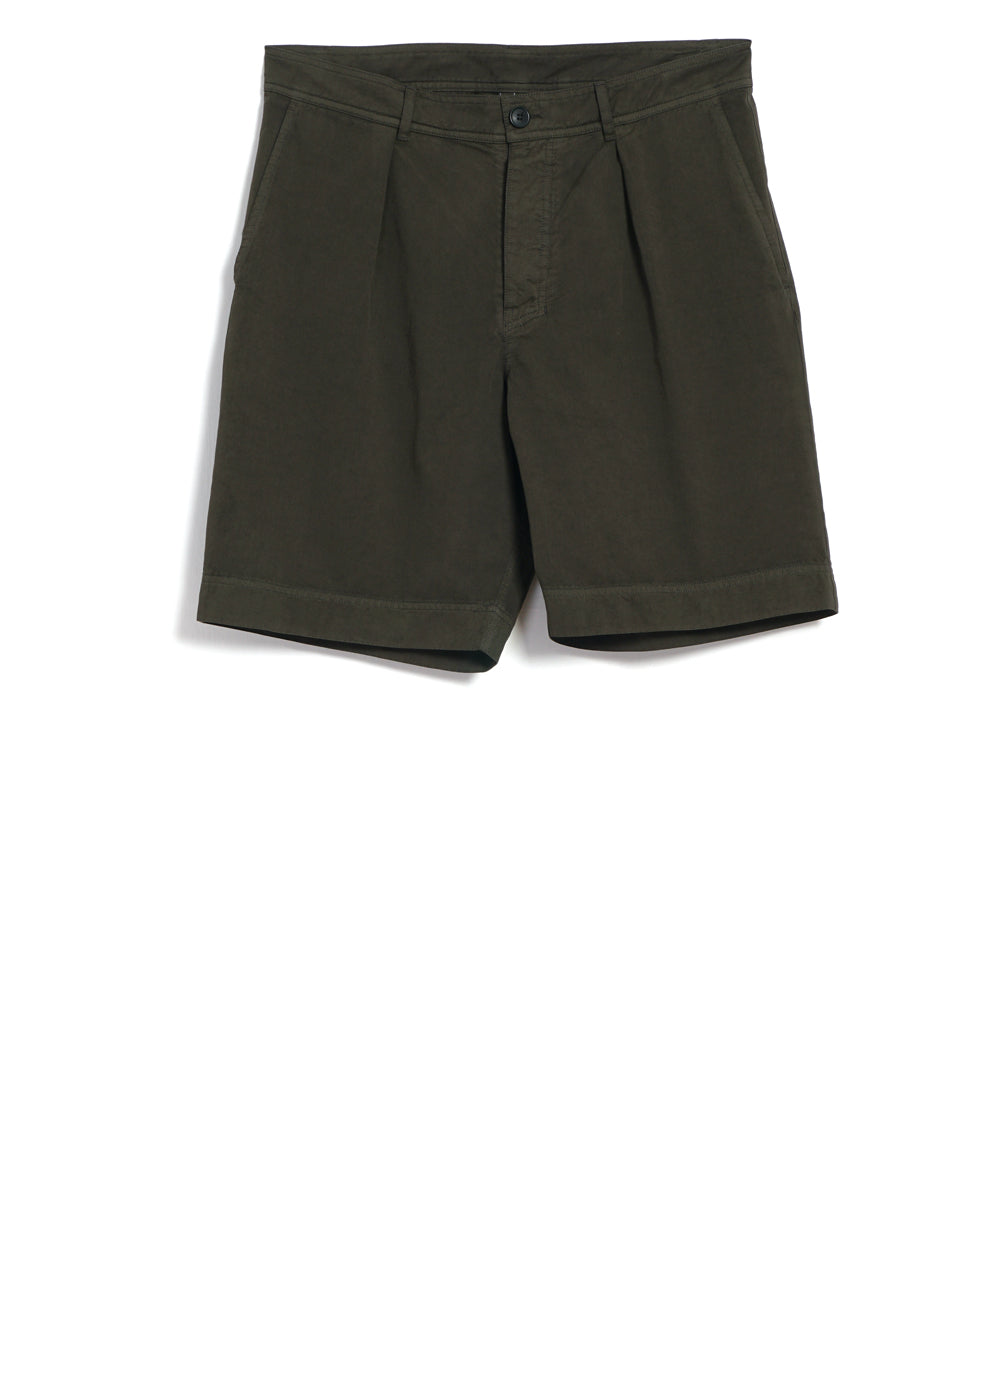 KAARE | Wide Pleated Shorts | Olive Drill